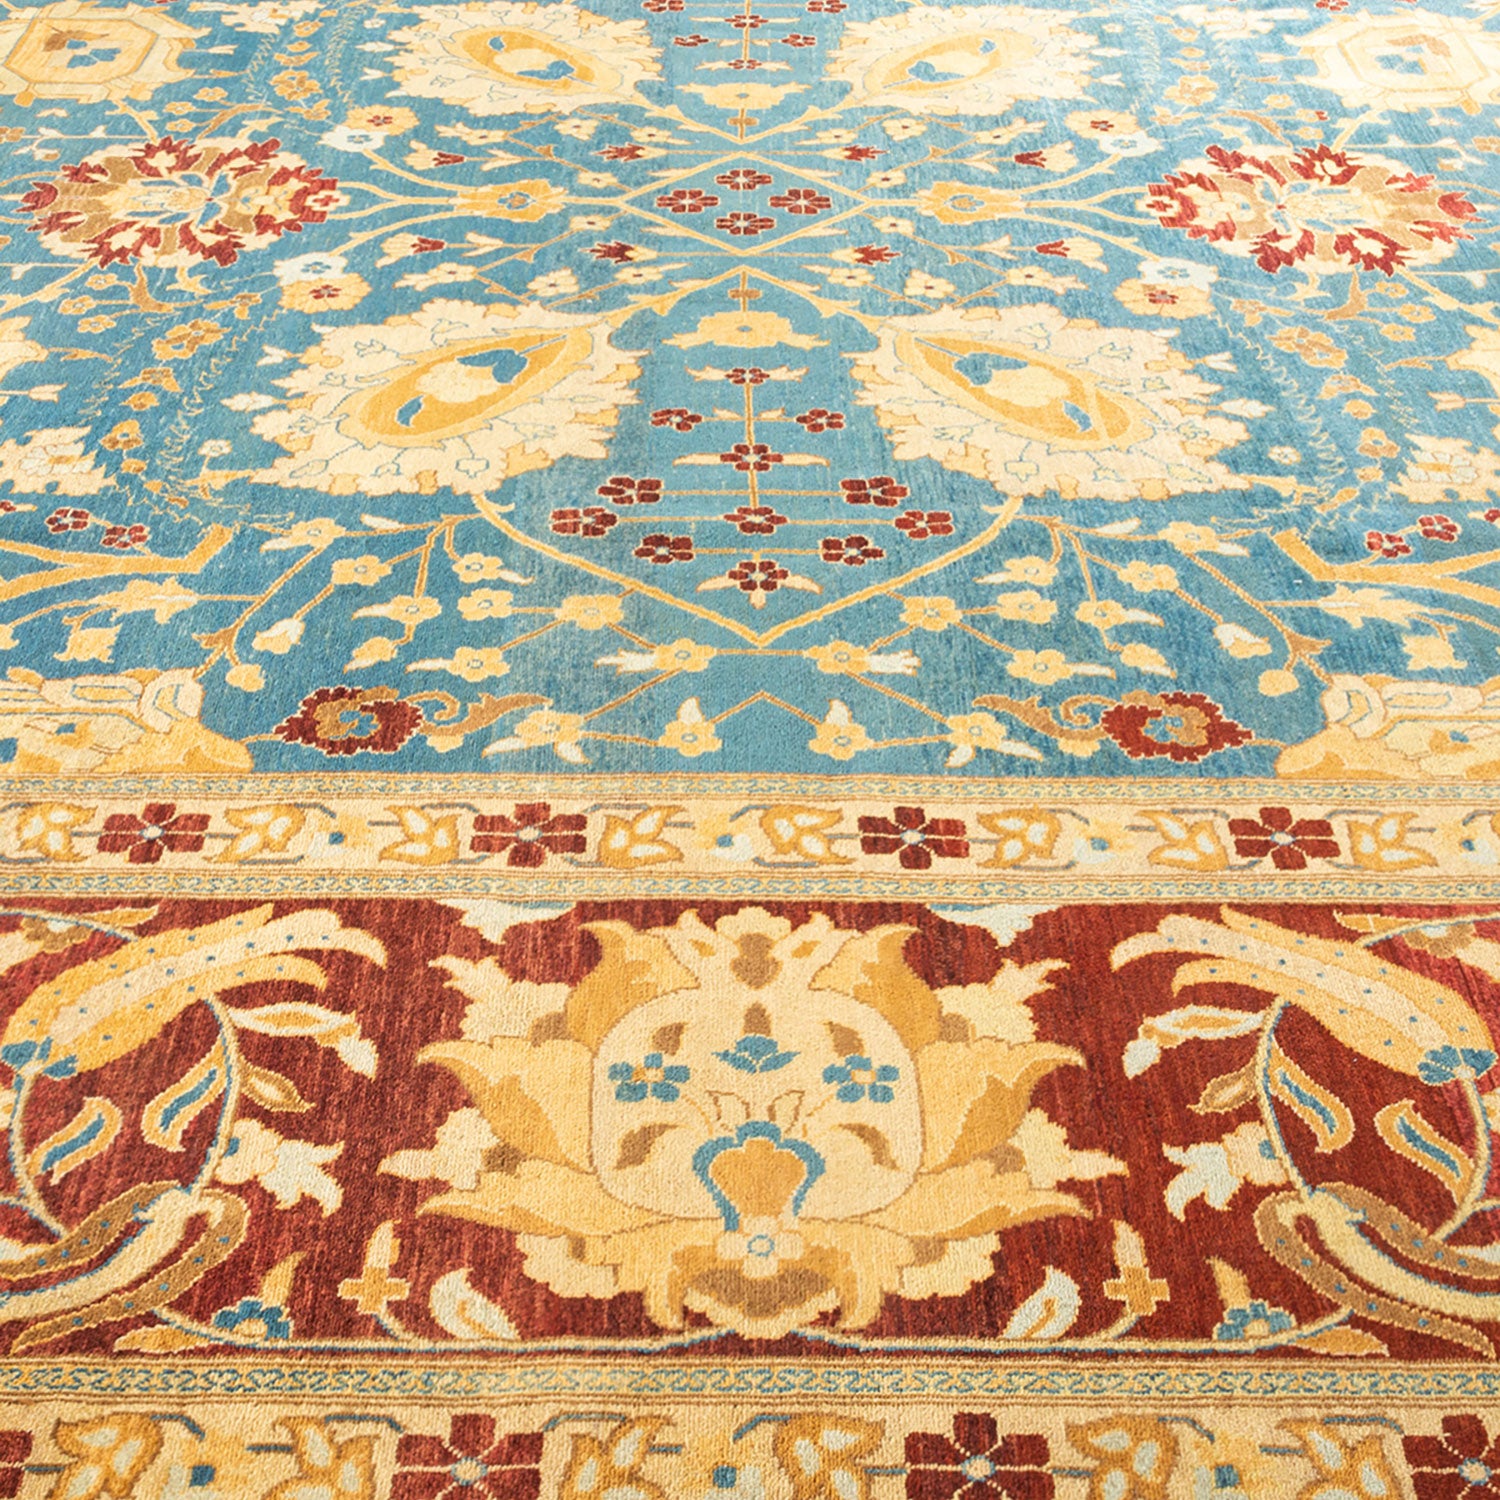 Close-up of a luxurious Persian-inspired carpet with intricate designs